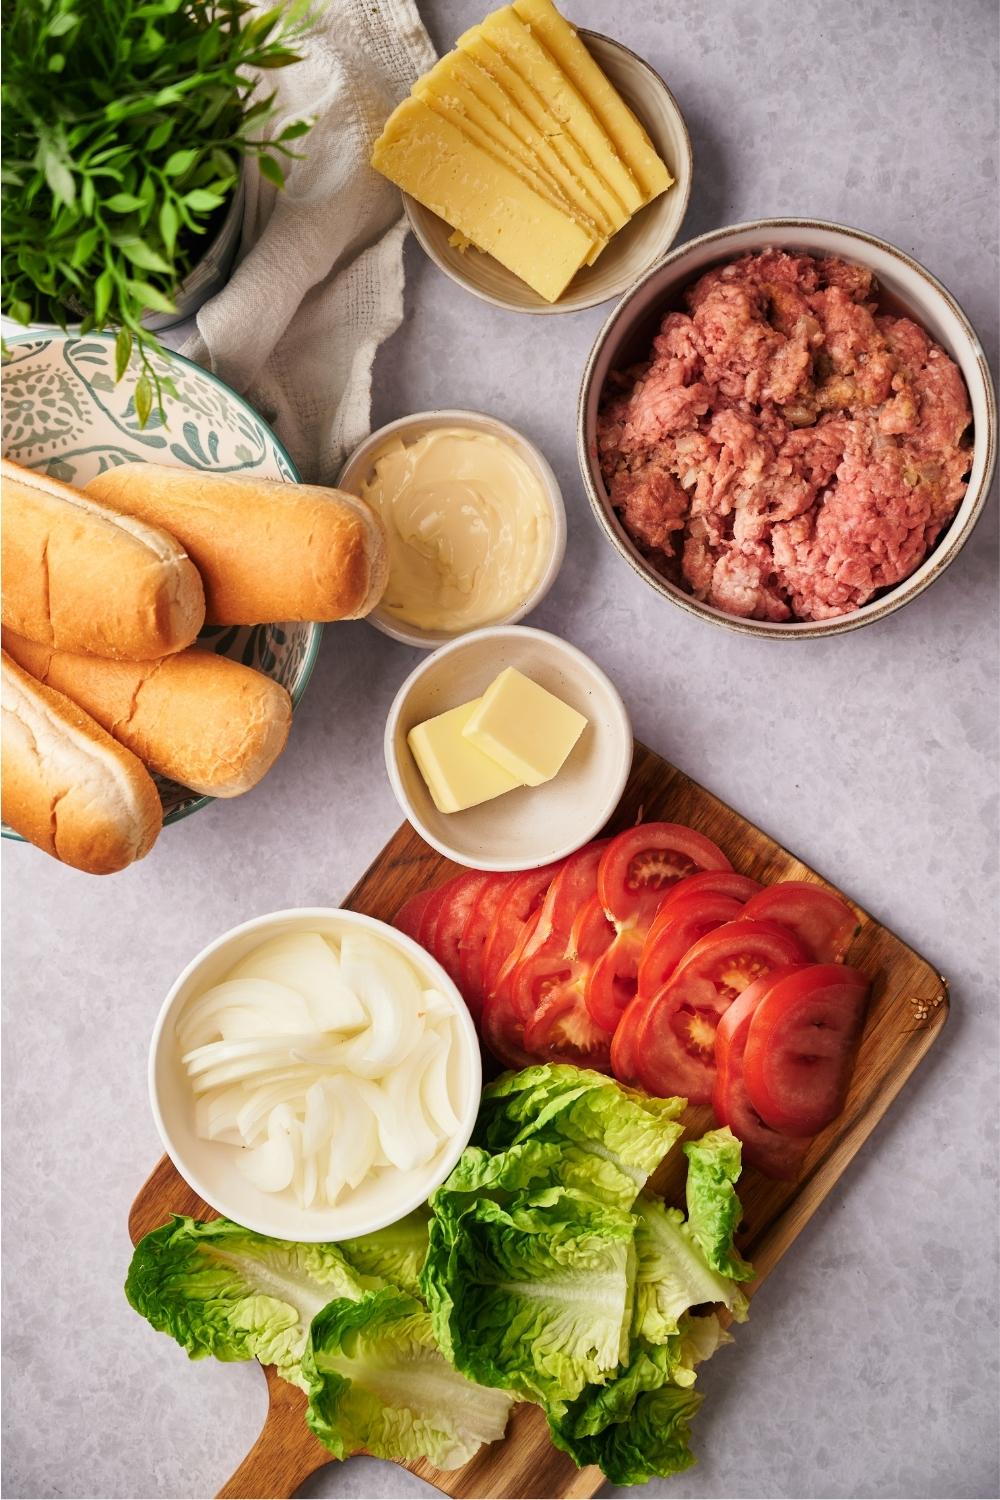 Lettuce, onion, and tomato on a wooden cutting board. Behind it is part of a bowl with for sub rolls in a bowl with ground beef in it, and a bowl of slices of cheese in it.